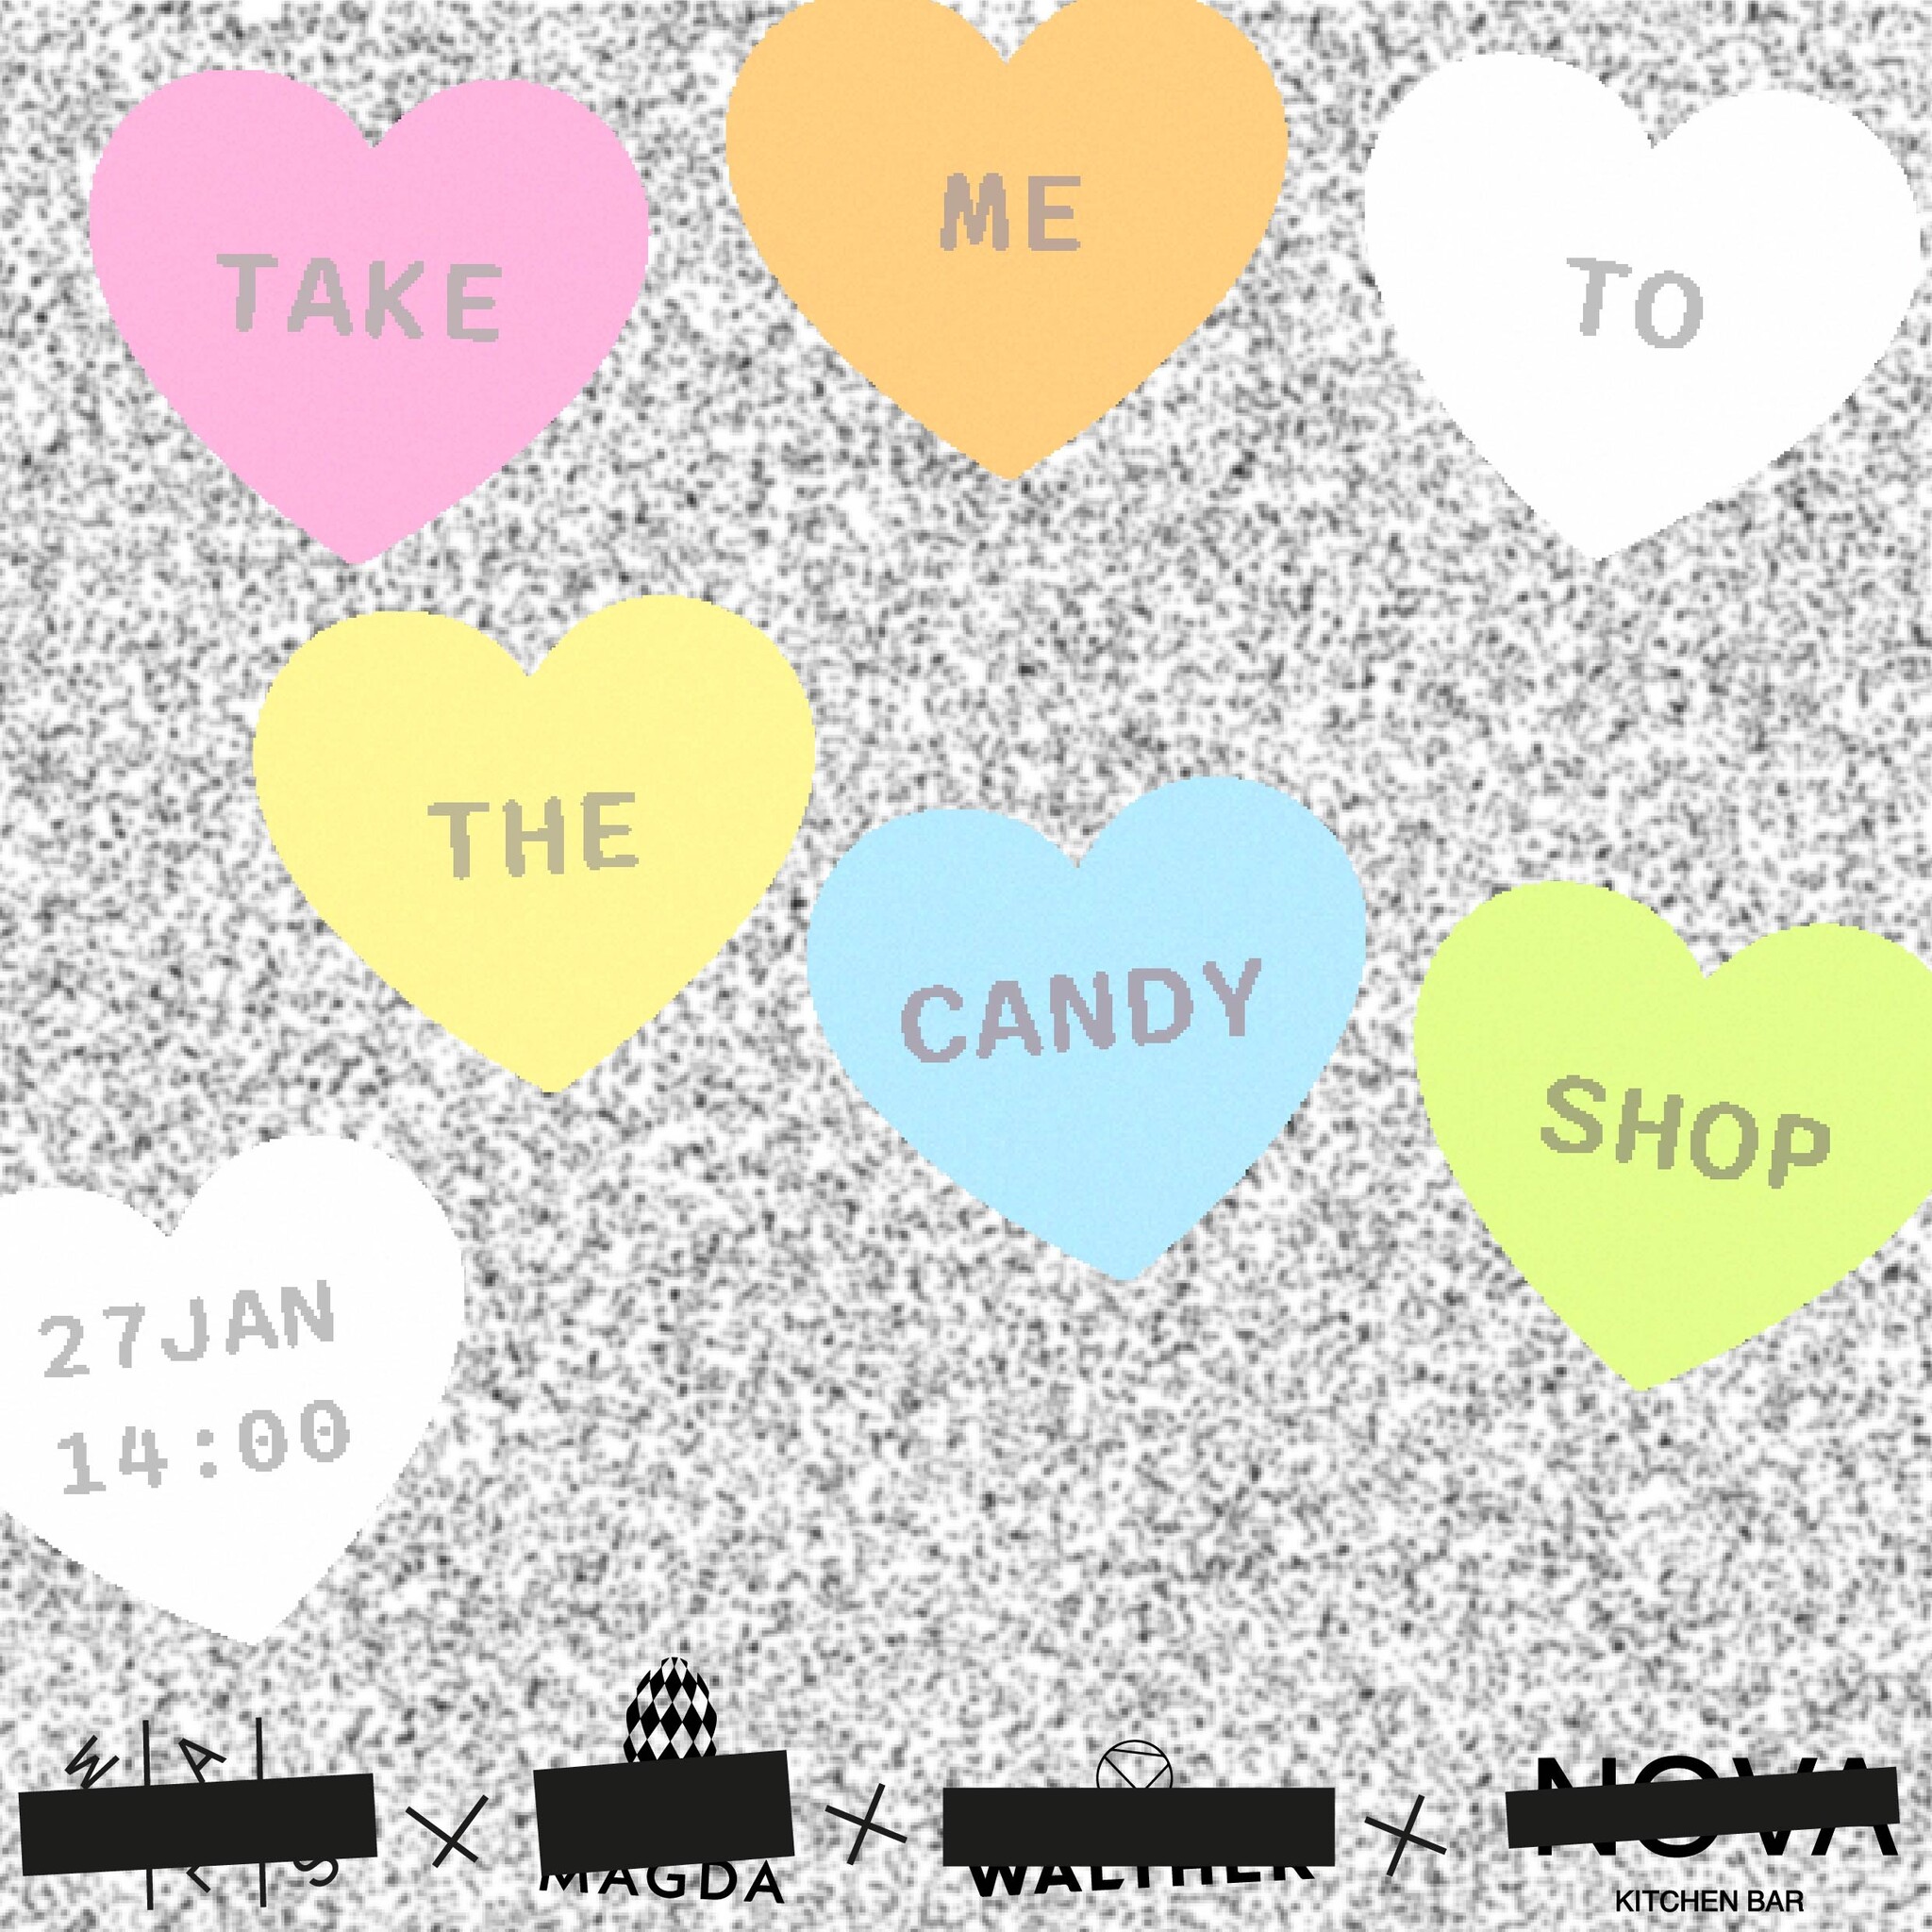 Event: Take me to the Candy Shop!